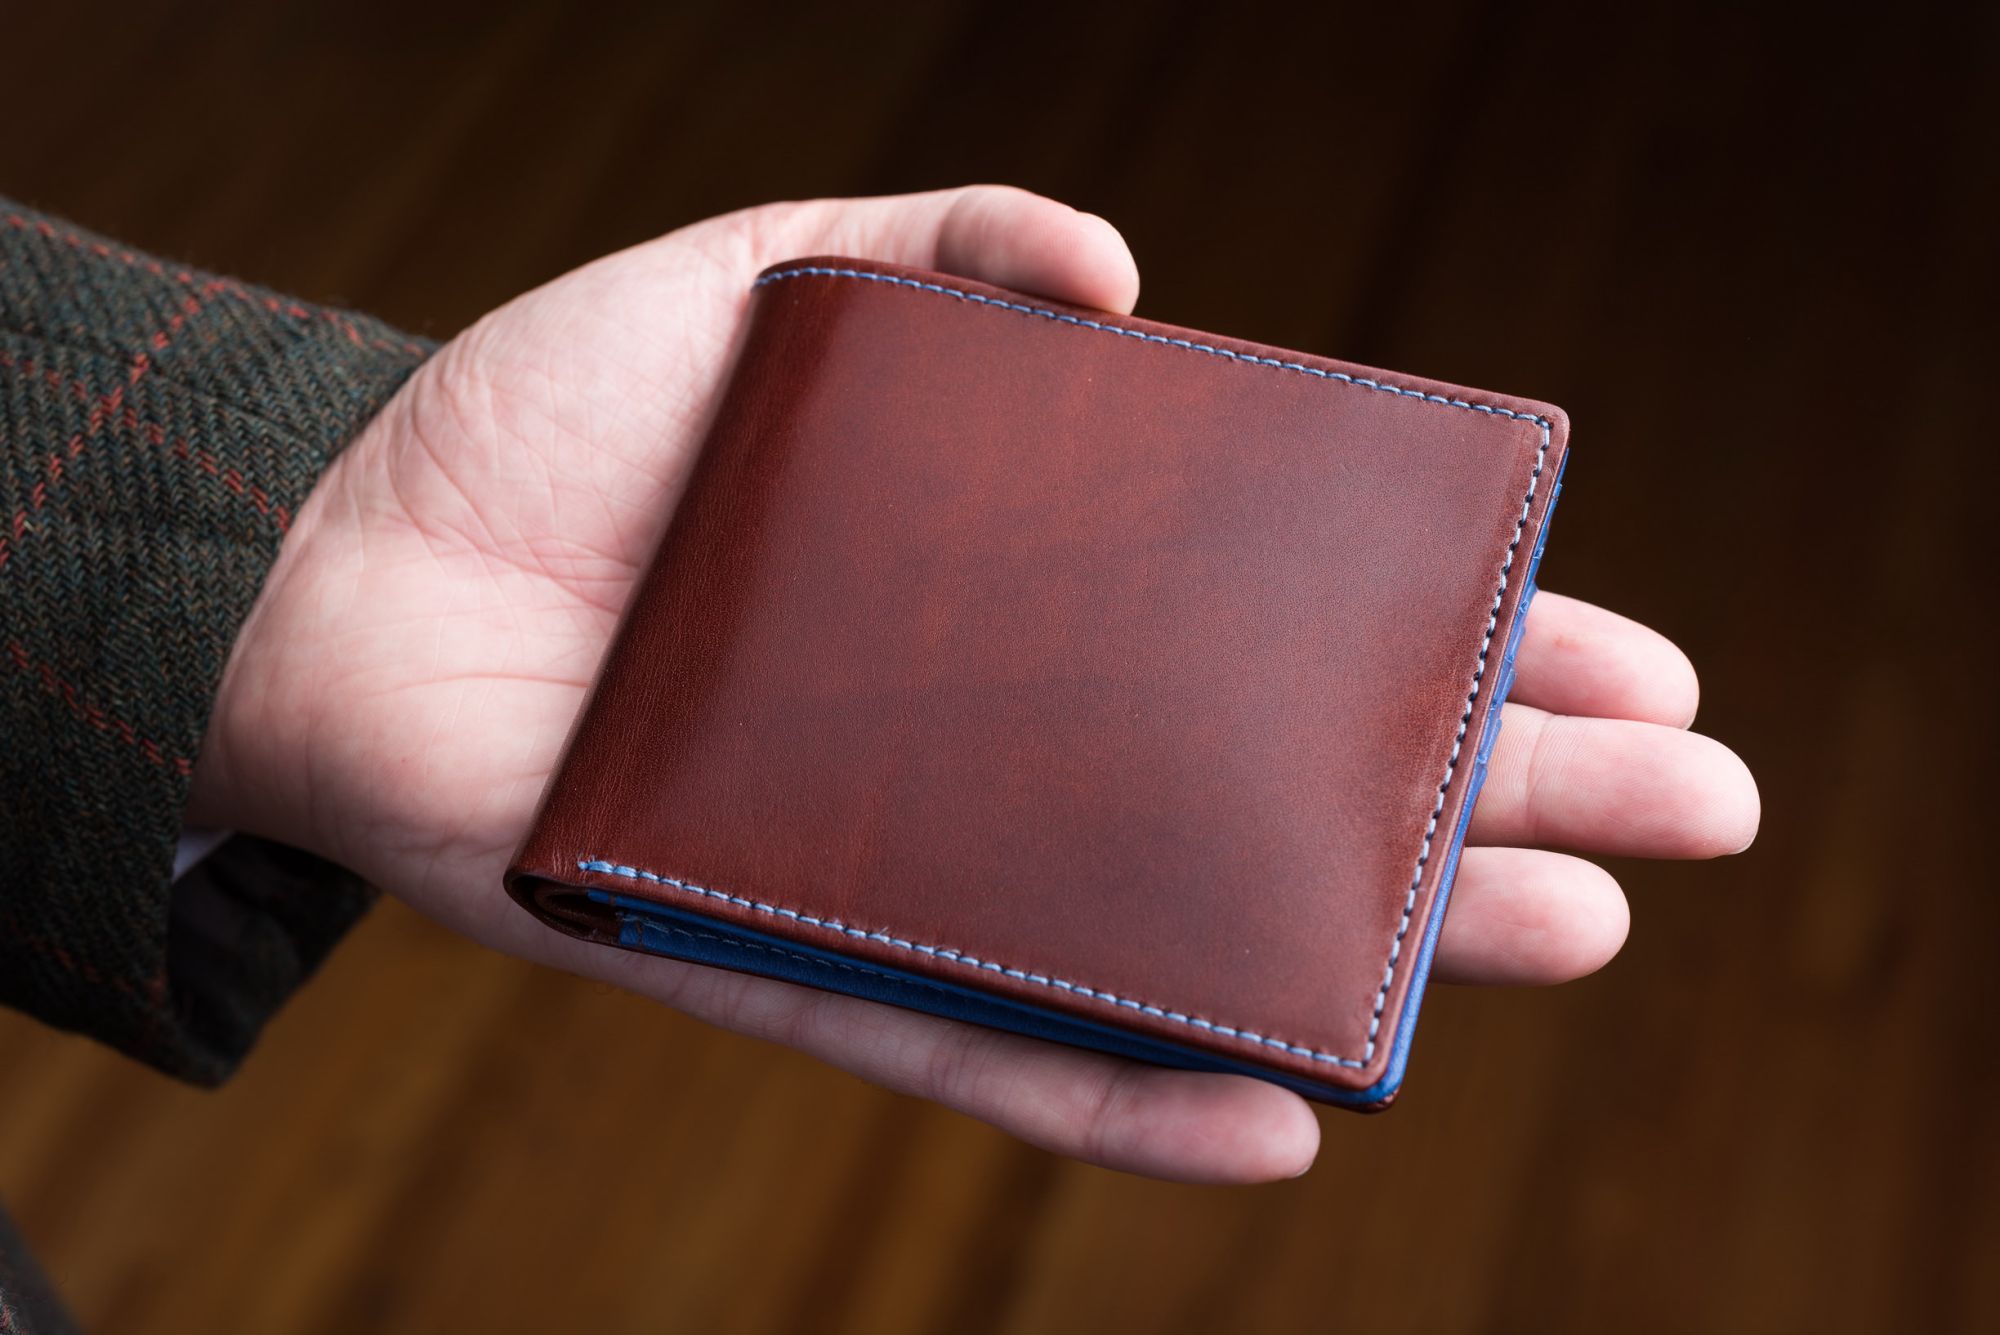 Leather Men Wallets with Coin Pocket Vintage Male Purse Function